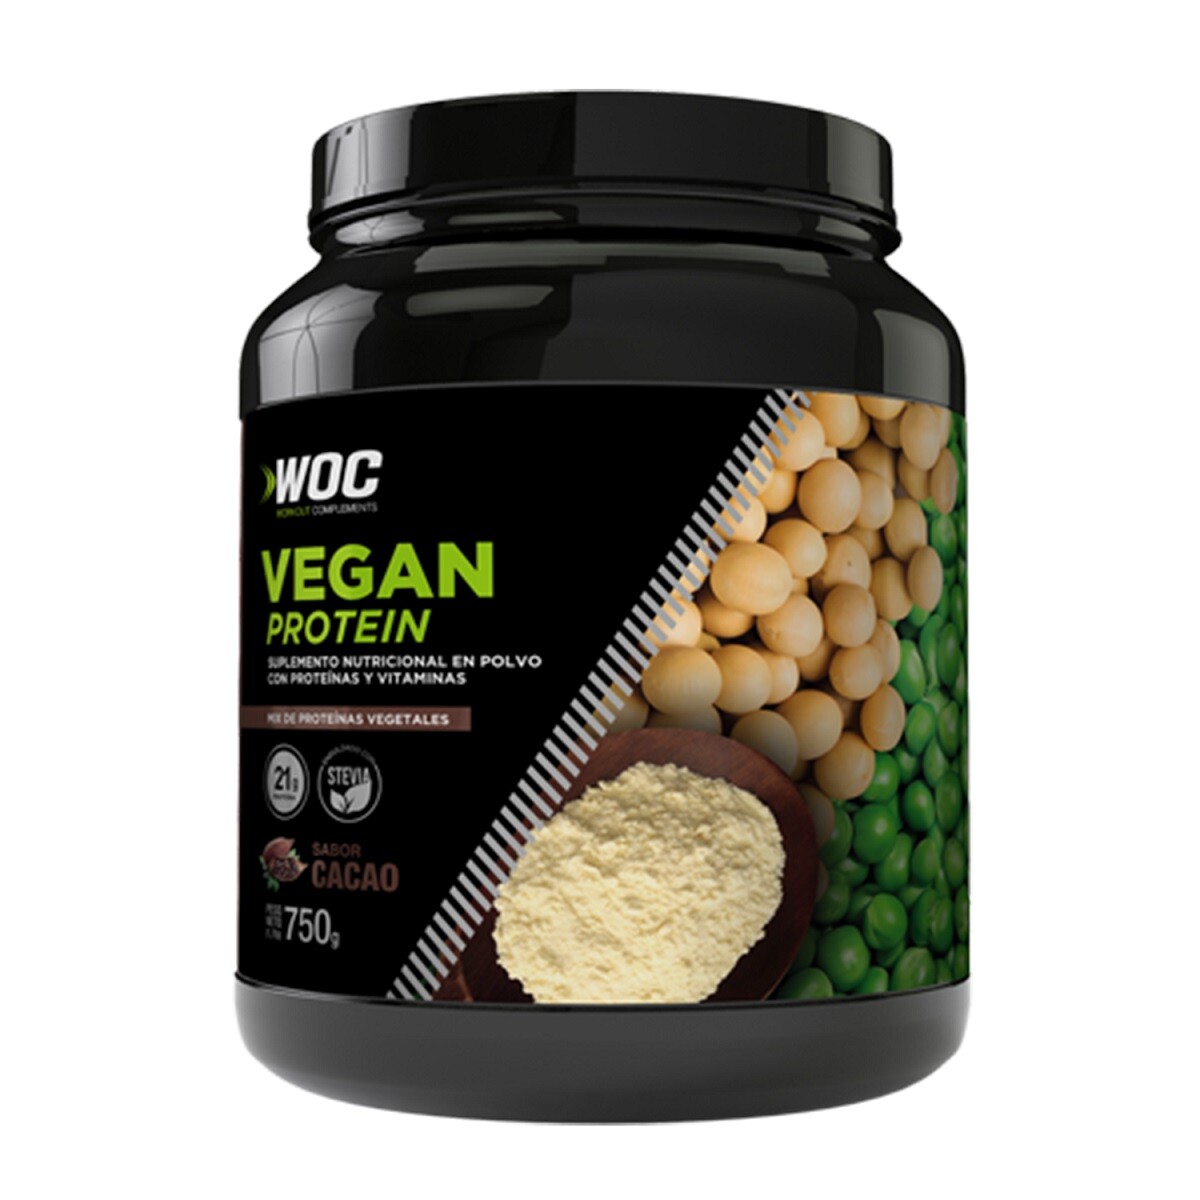 Vegan Protein Woc Cacao 750 Grs. 